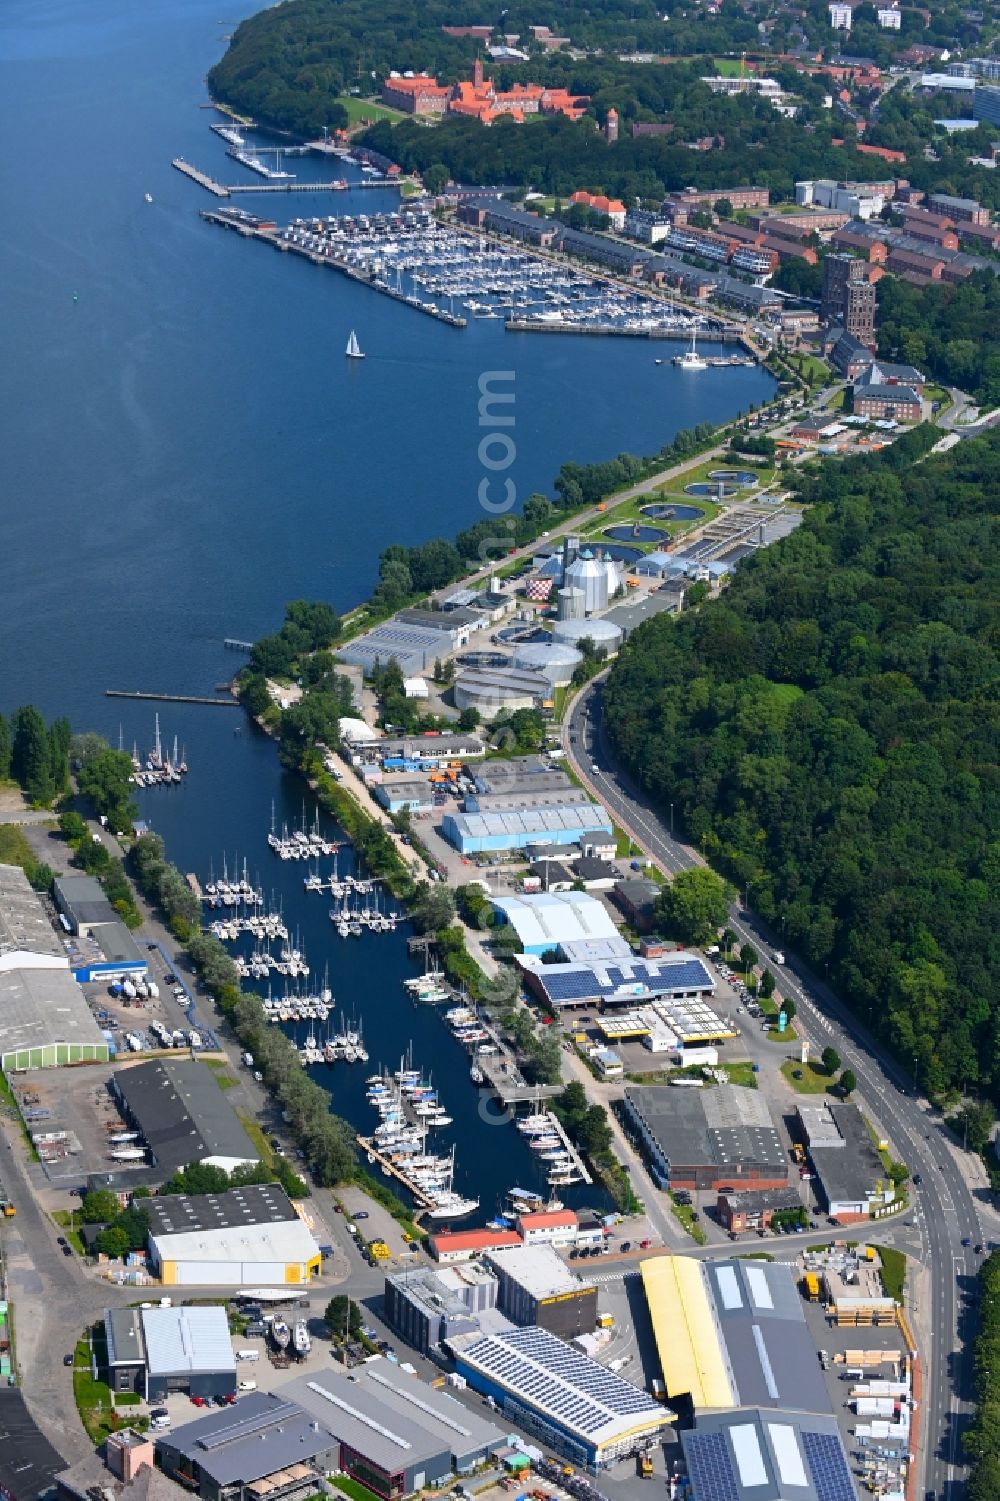 Flensburg from above - Port facilities on the seashore of the Am Industriehafen - Industriekai entlang of Kielseng in Flensburg in the state Schleswig-Holstein, Germany